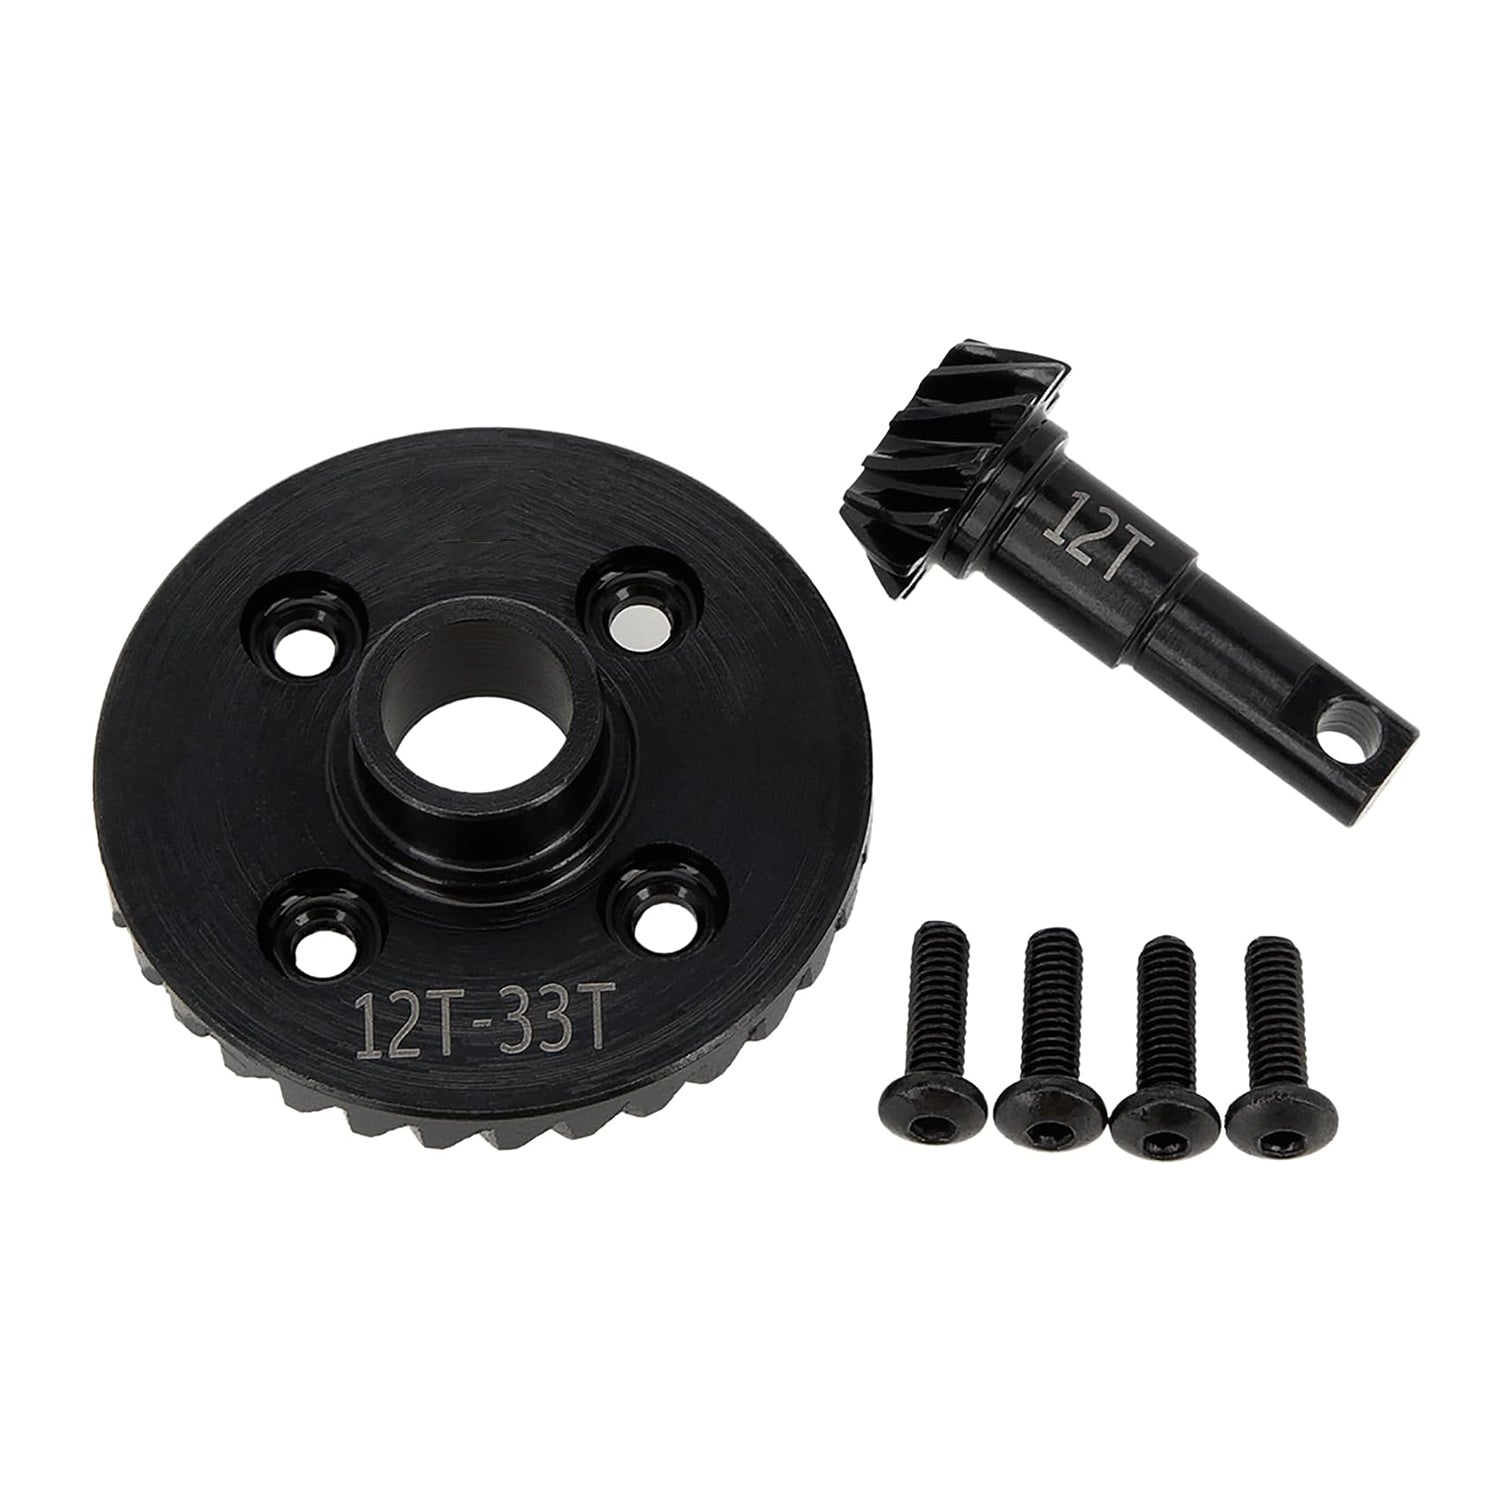 12T/33T underdrive gear for TRX-4 and TRX-6